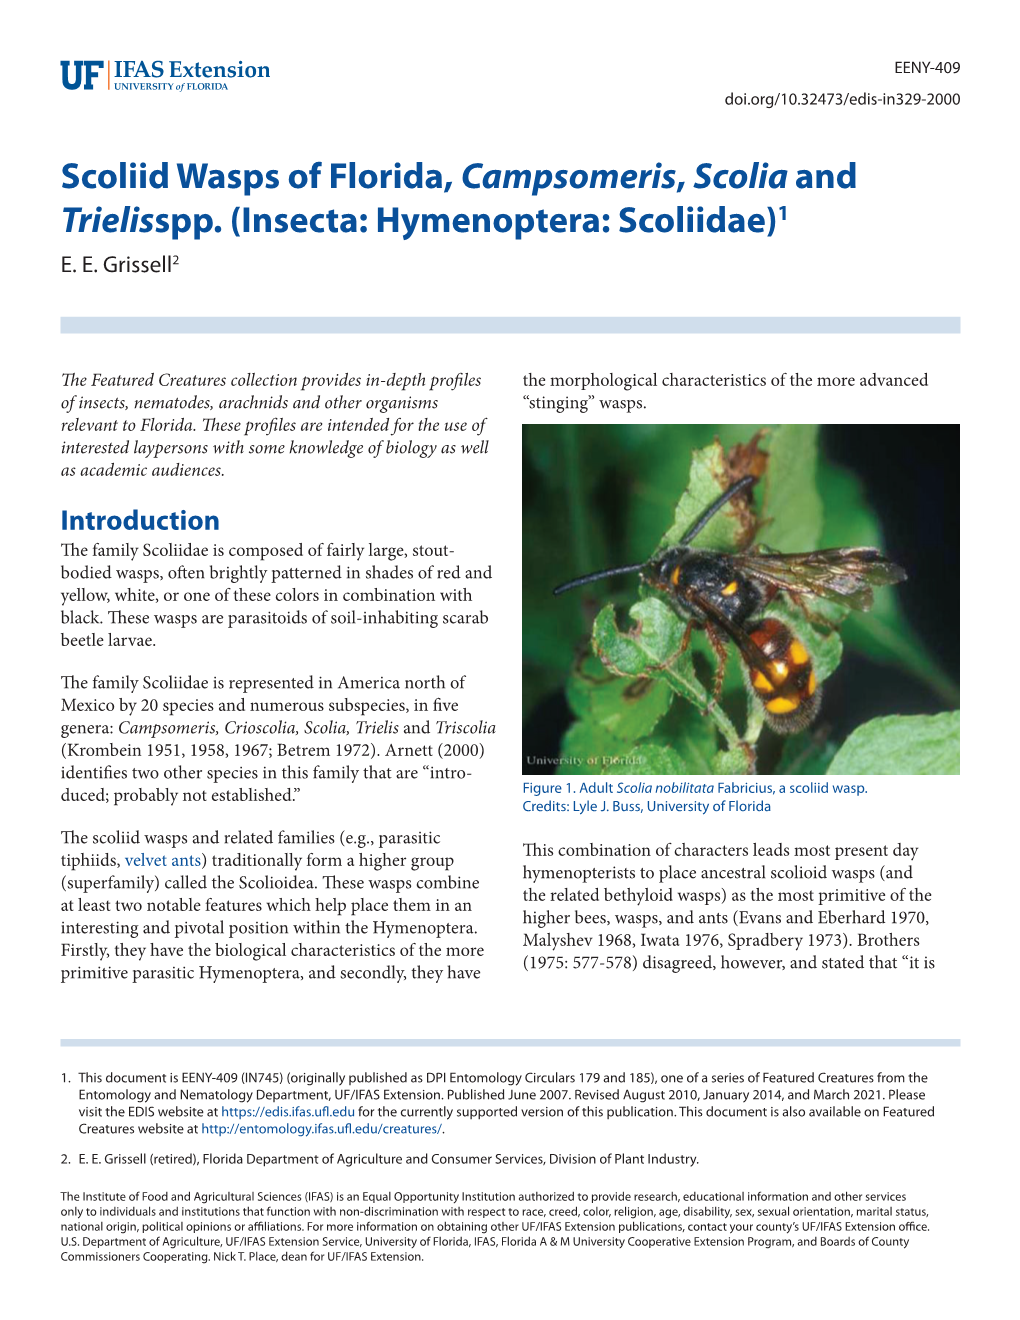 Scoliid Wasps of Florida, Campsomeris, Scolia and Trielisspp. (Insecta: Hymenoptera: Scoliidae)1 E